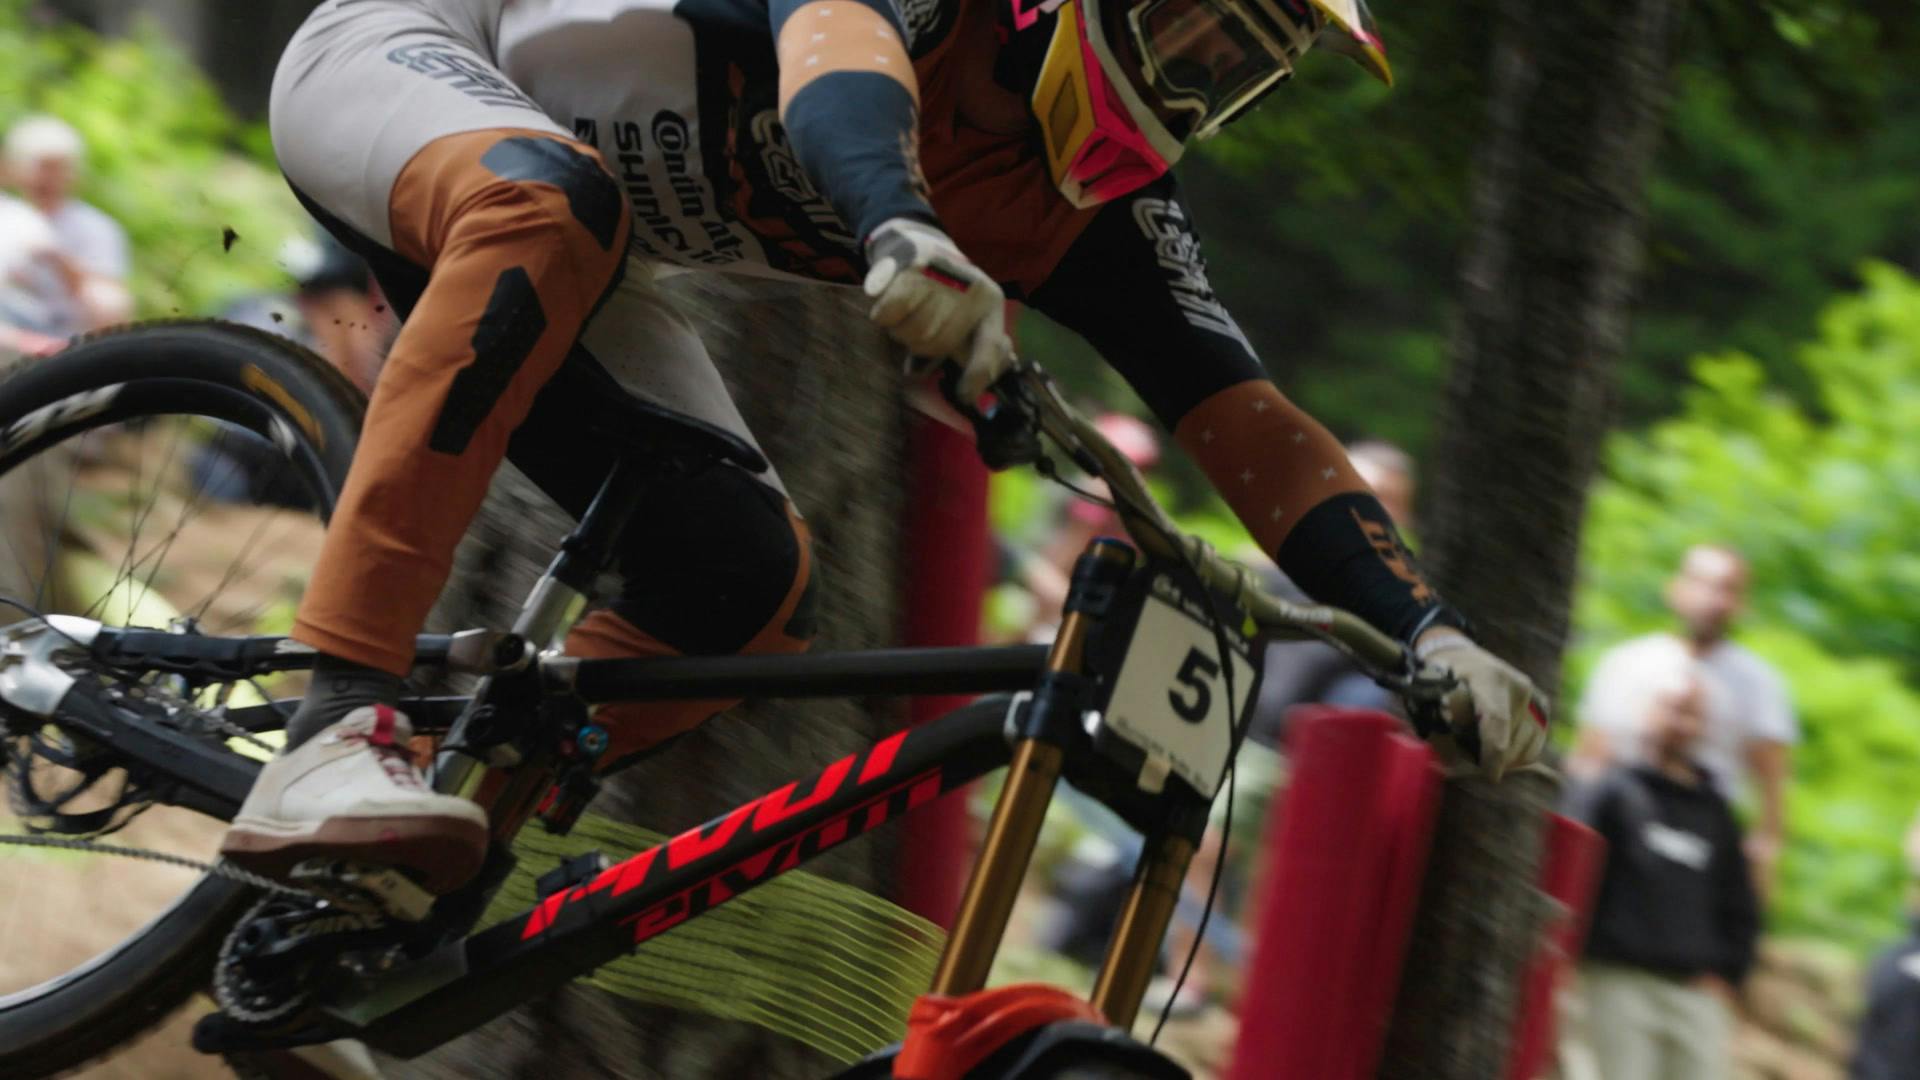 A New Era of Downhill | Story of the Race with Ben Cathro